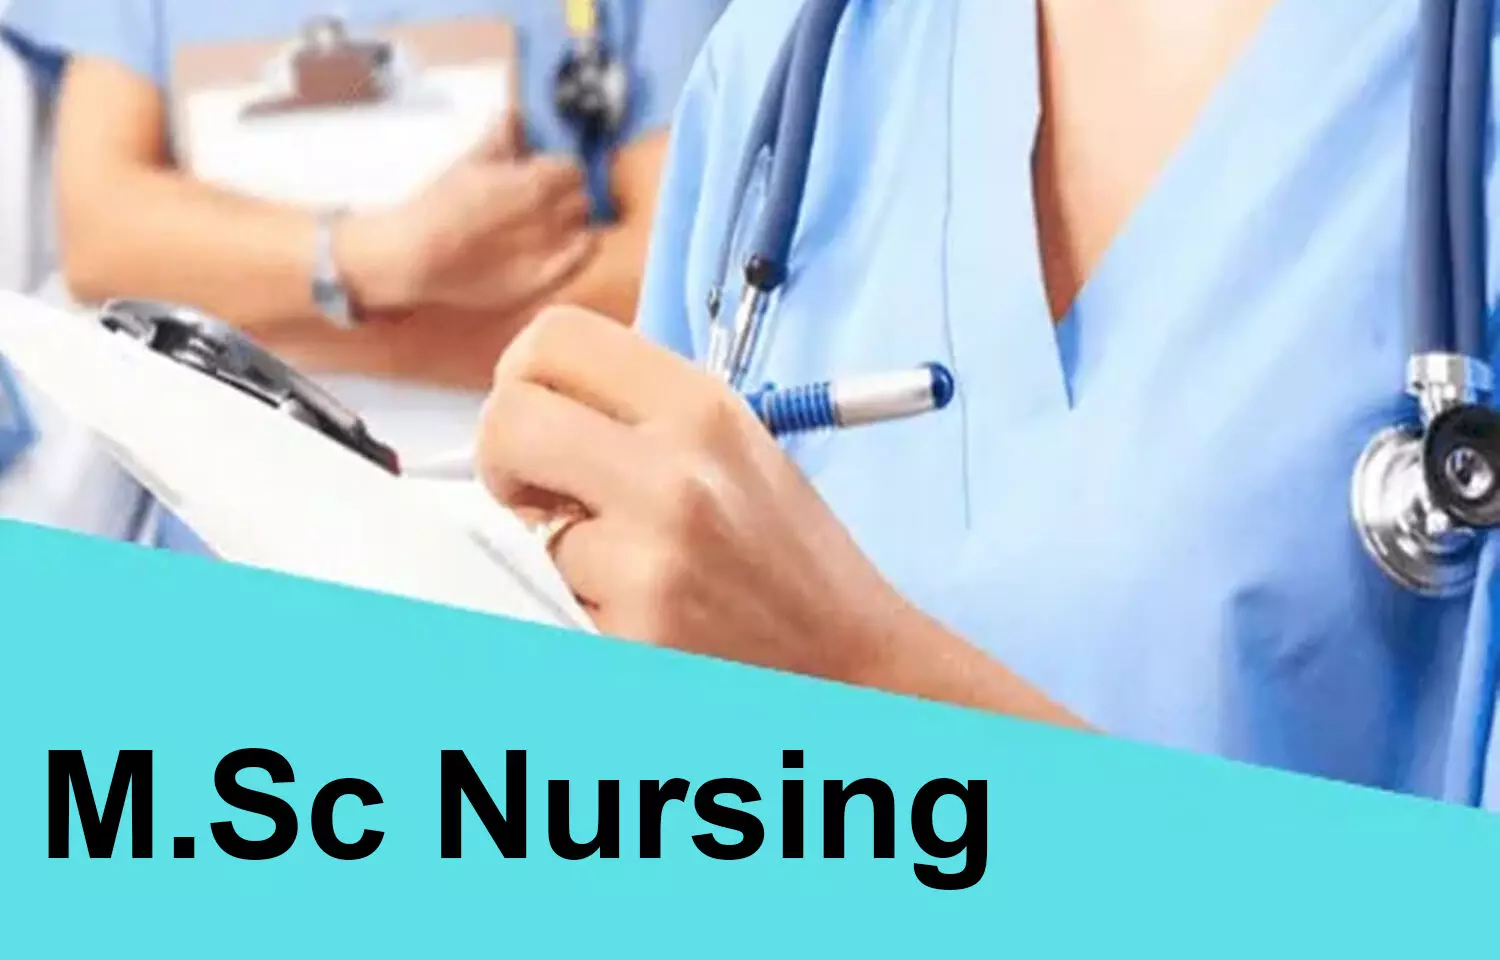 RGUHS informs on Conduct of University Theory Examinations of MSc Nursing, Nurse Practitioner in Critical Care April 2021